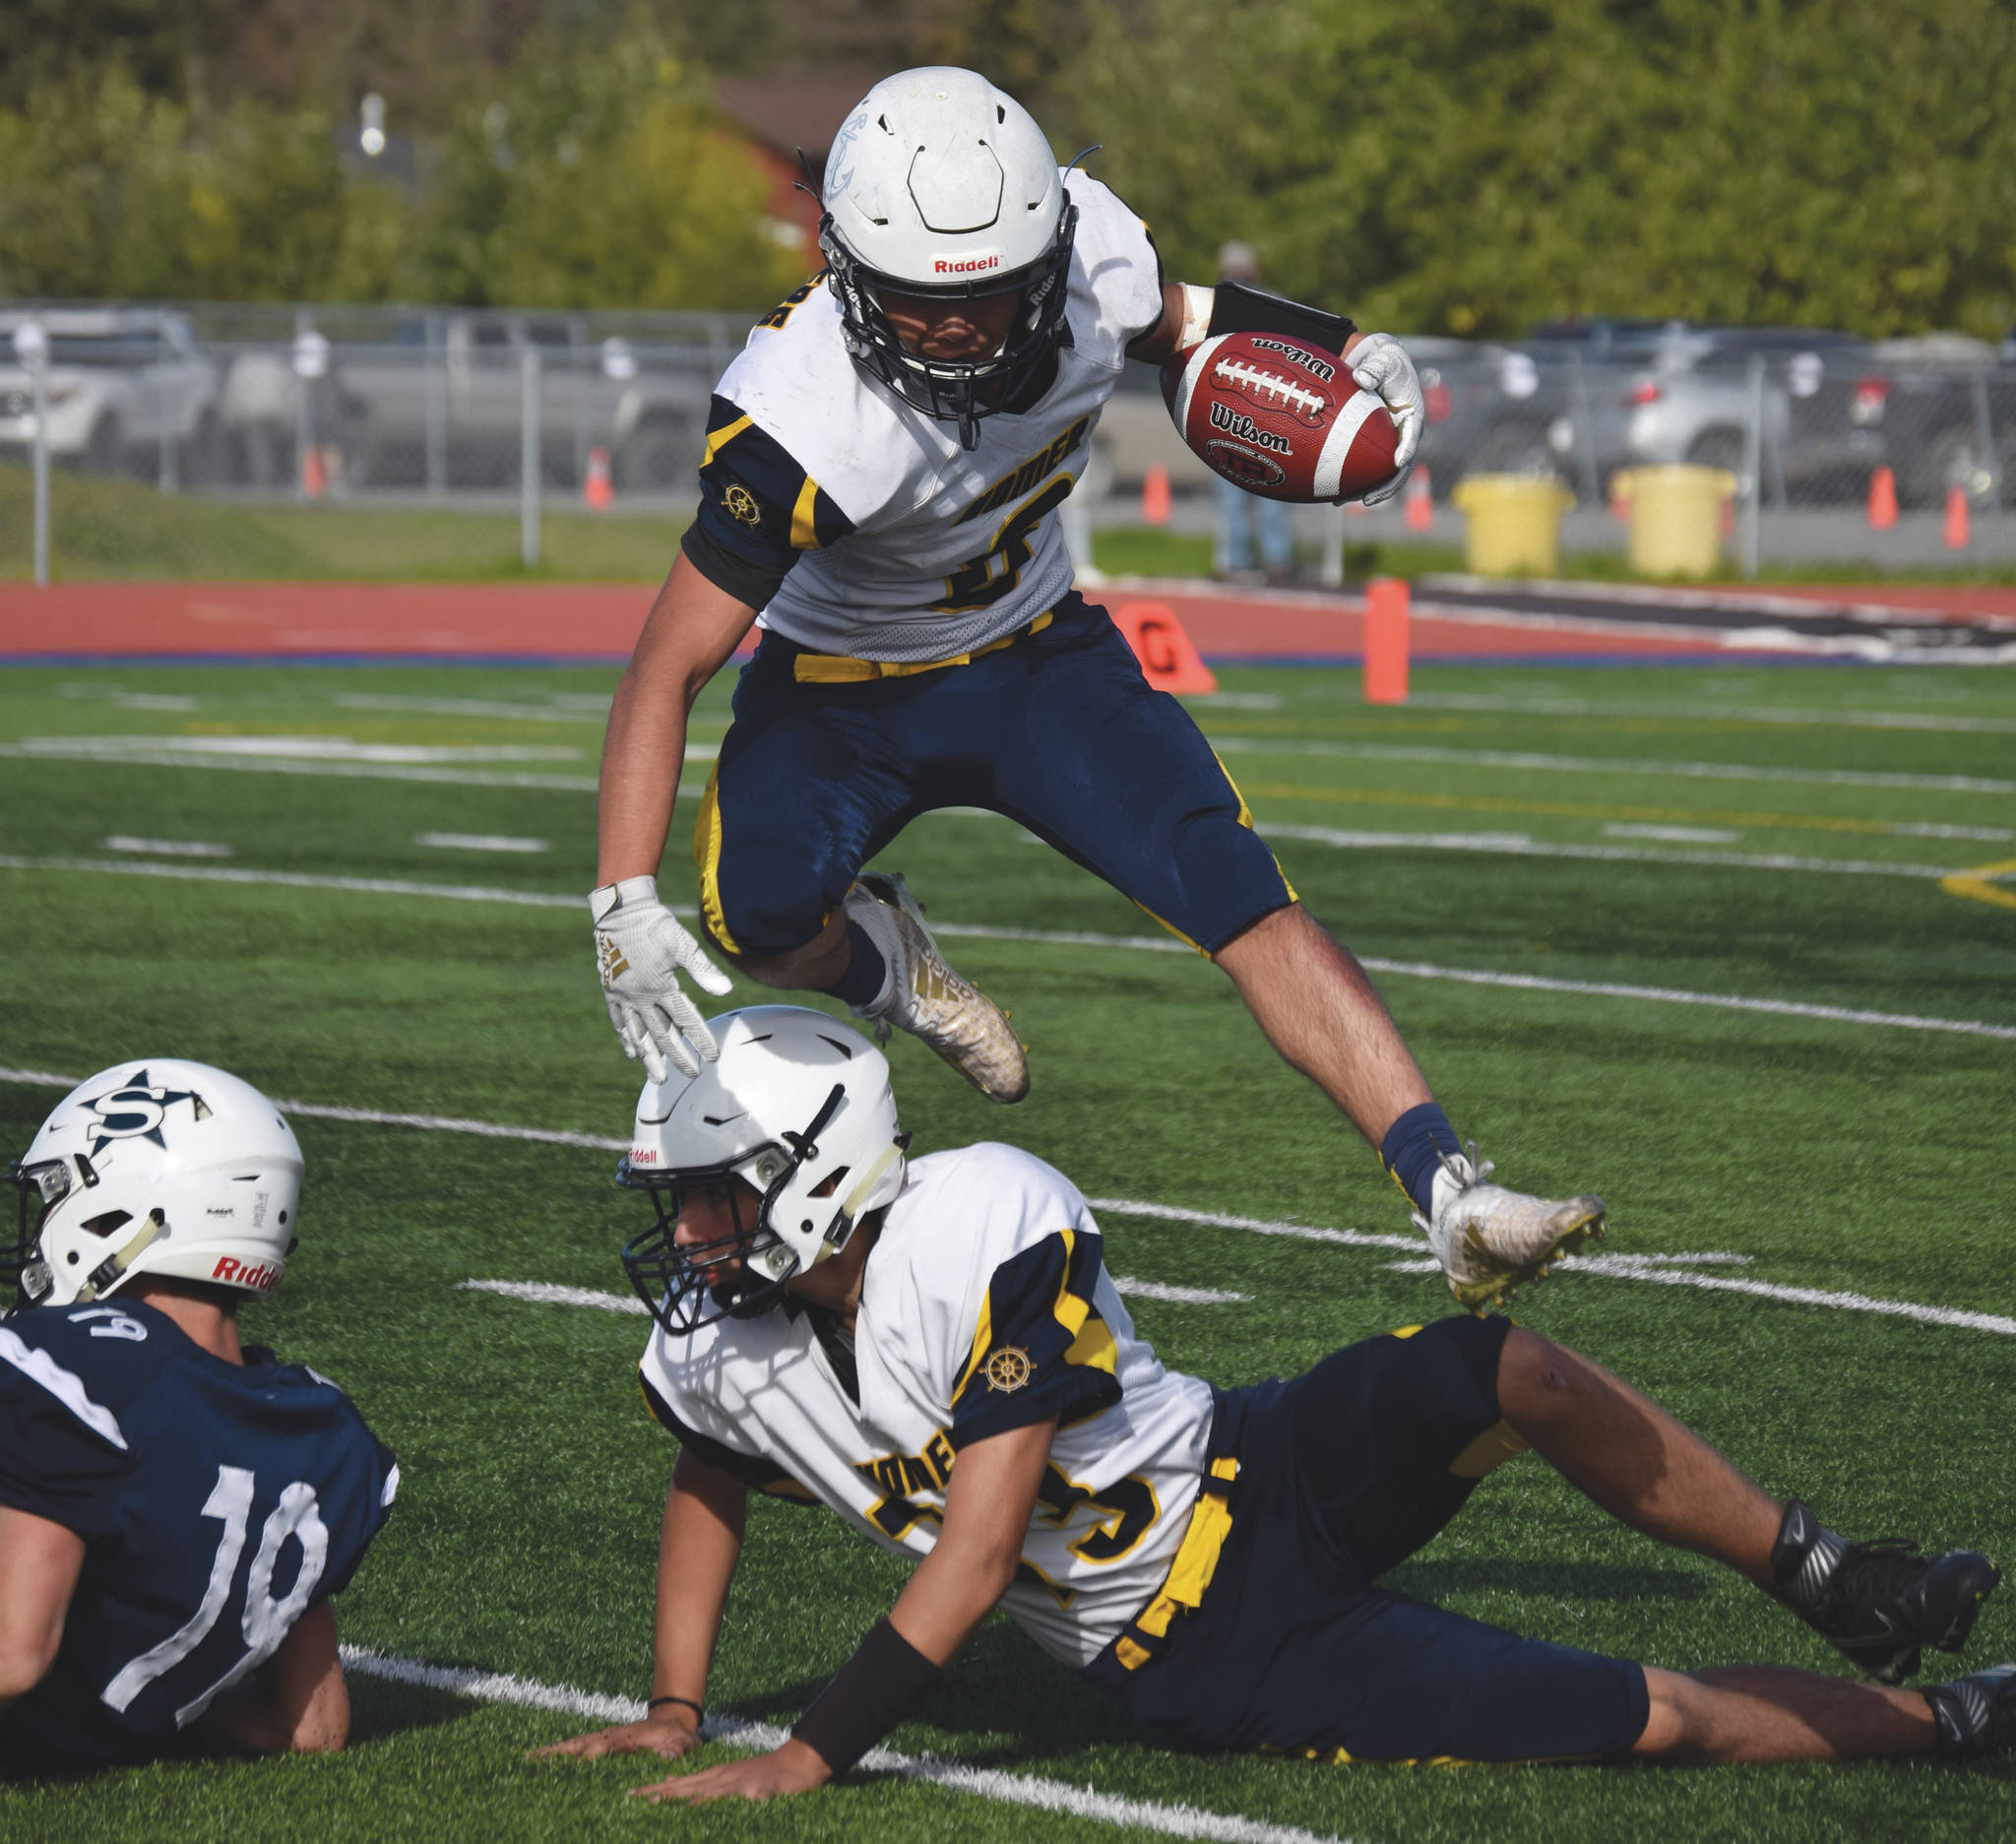 Homer’s Sly Gaona jumps over teammate Eddie Robinett on Saturday, Sept. 5, 2020, at Justin Maile Field at Soldotna High School in Soldotna, Alaska. (Photo by Jeff Helminiak/Peninsula Clarion)